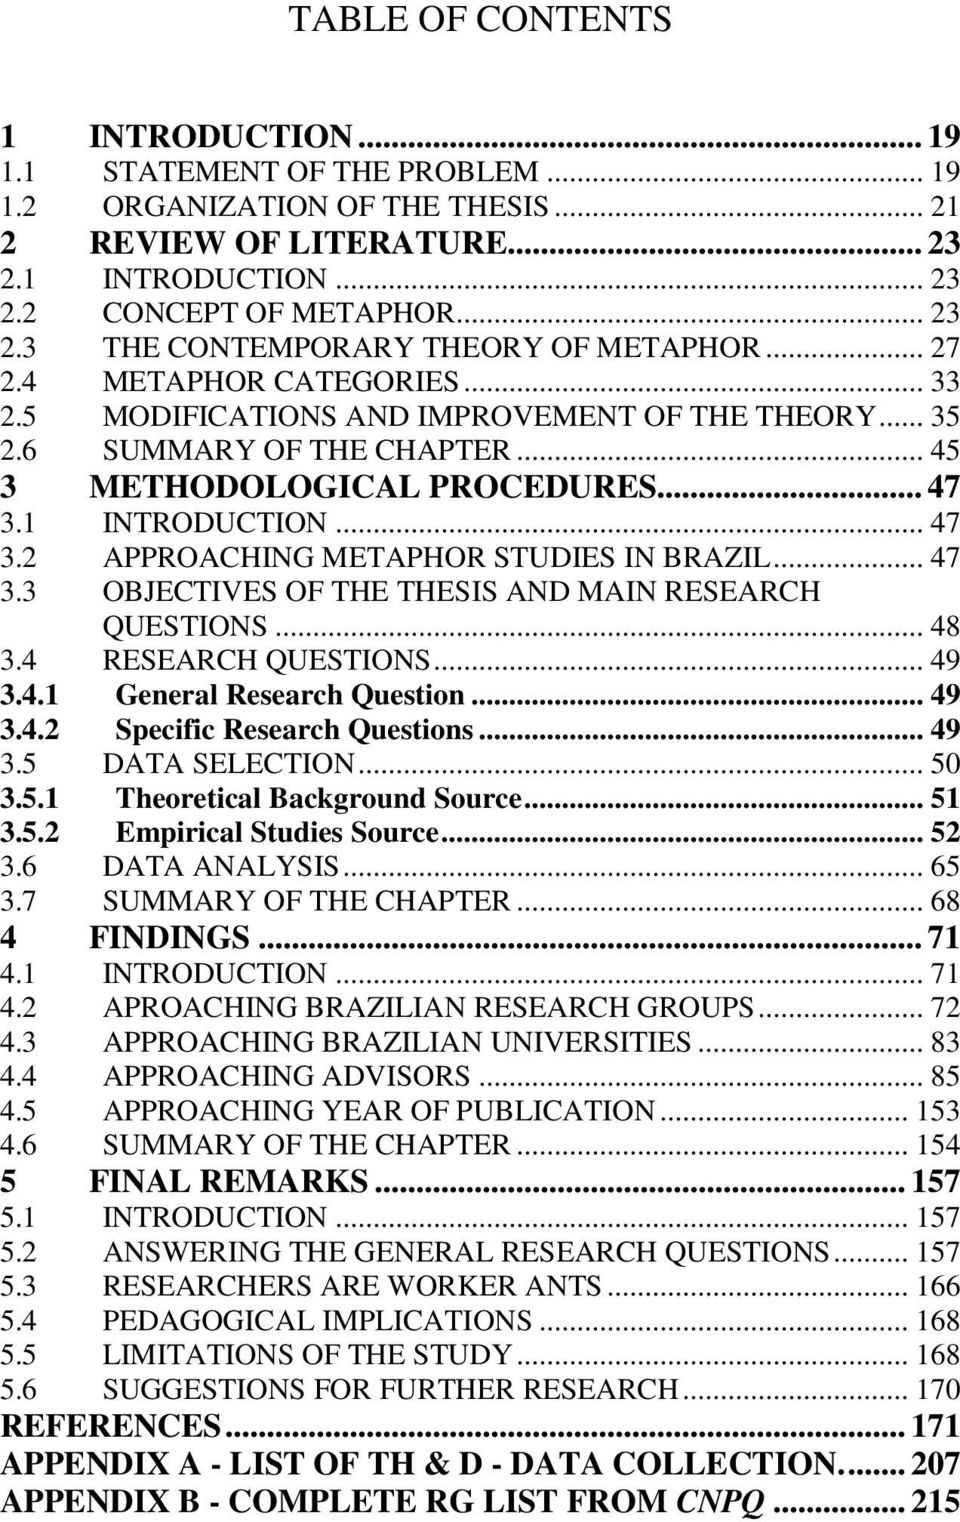 .. 47 3.3 OBJECTIVES OF THE THESIS AND MAIN RESEARCH QUESTIONS... 48 3.4 RESEARCH QUESTIONS... 49 3.4.1 General Research Question... 49 3.4.2 Specific Research Questions... 49 3.5 DATA SELECTION.